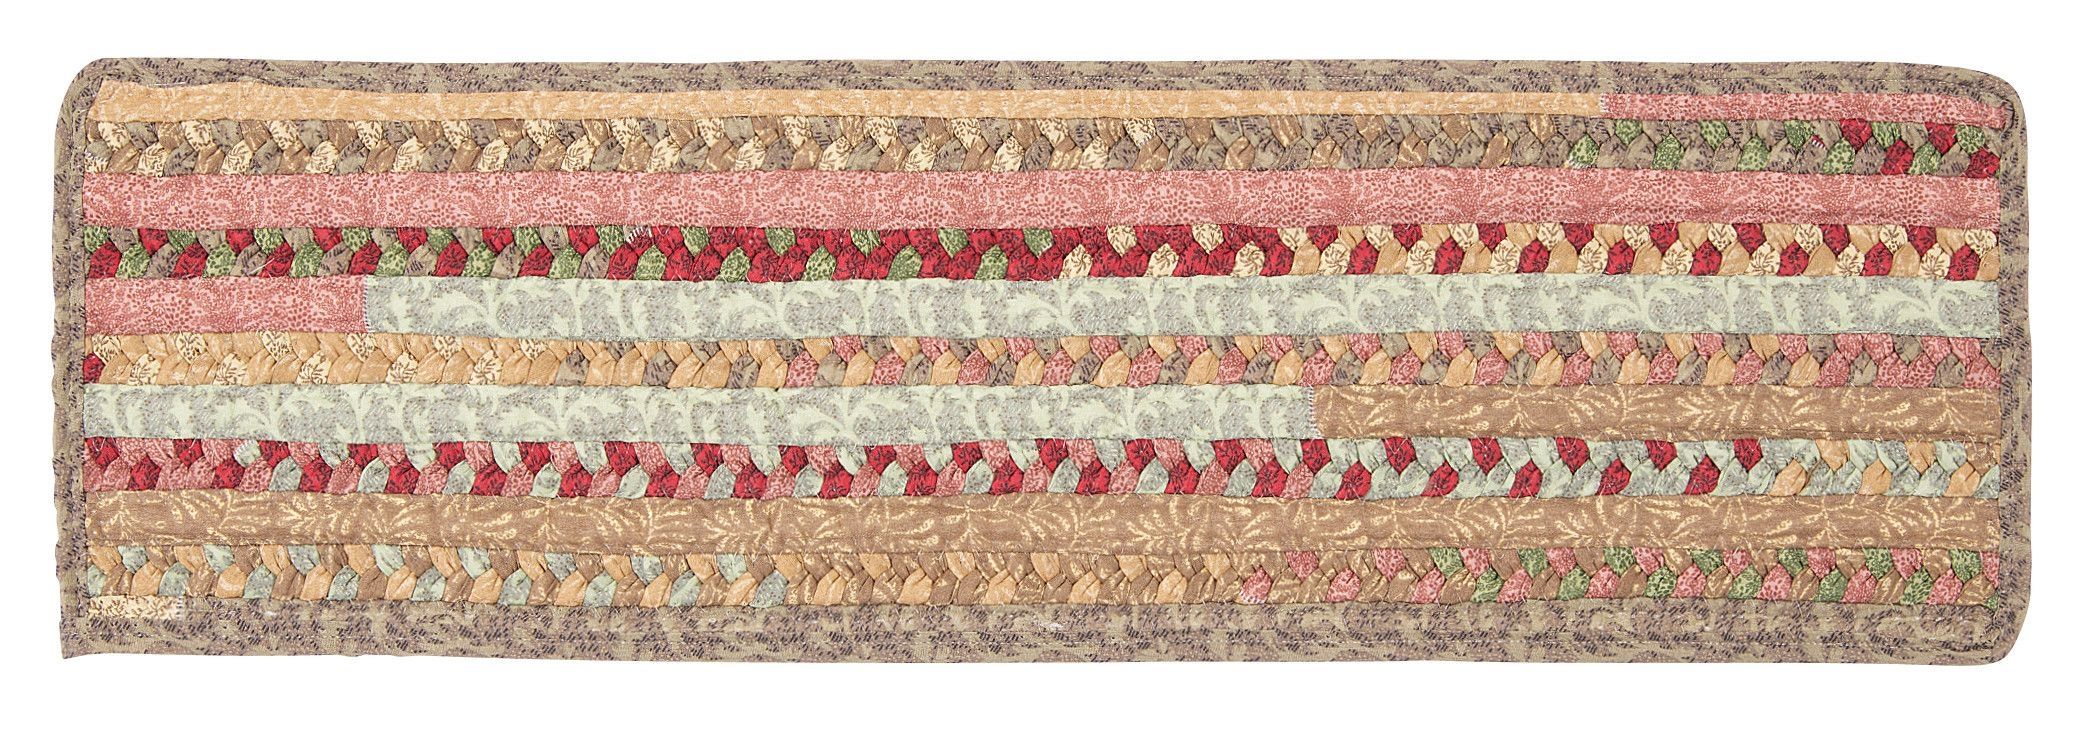 Olivera Rectangle Braided Cotton Blend Stair Tread Ov69 Light Within Braided Rug Stair Treads (View 13 of 15)